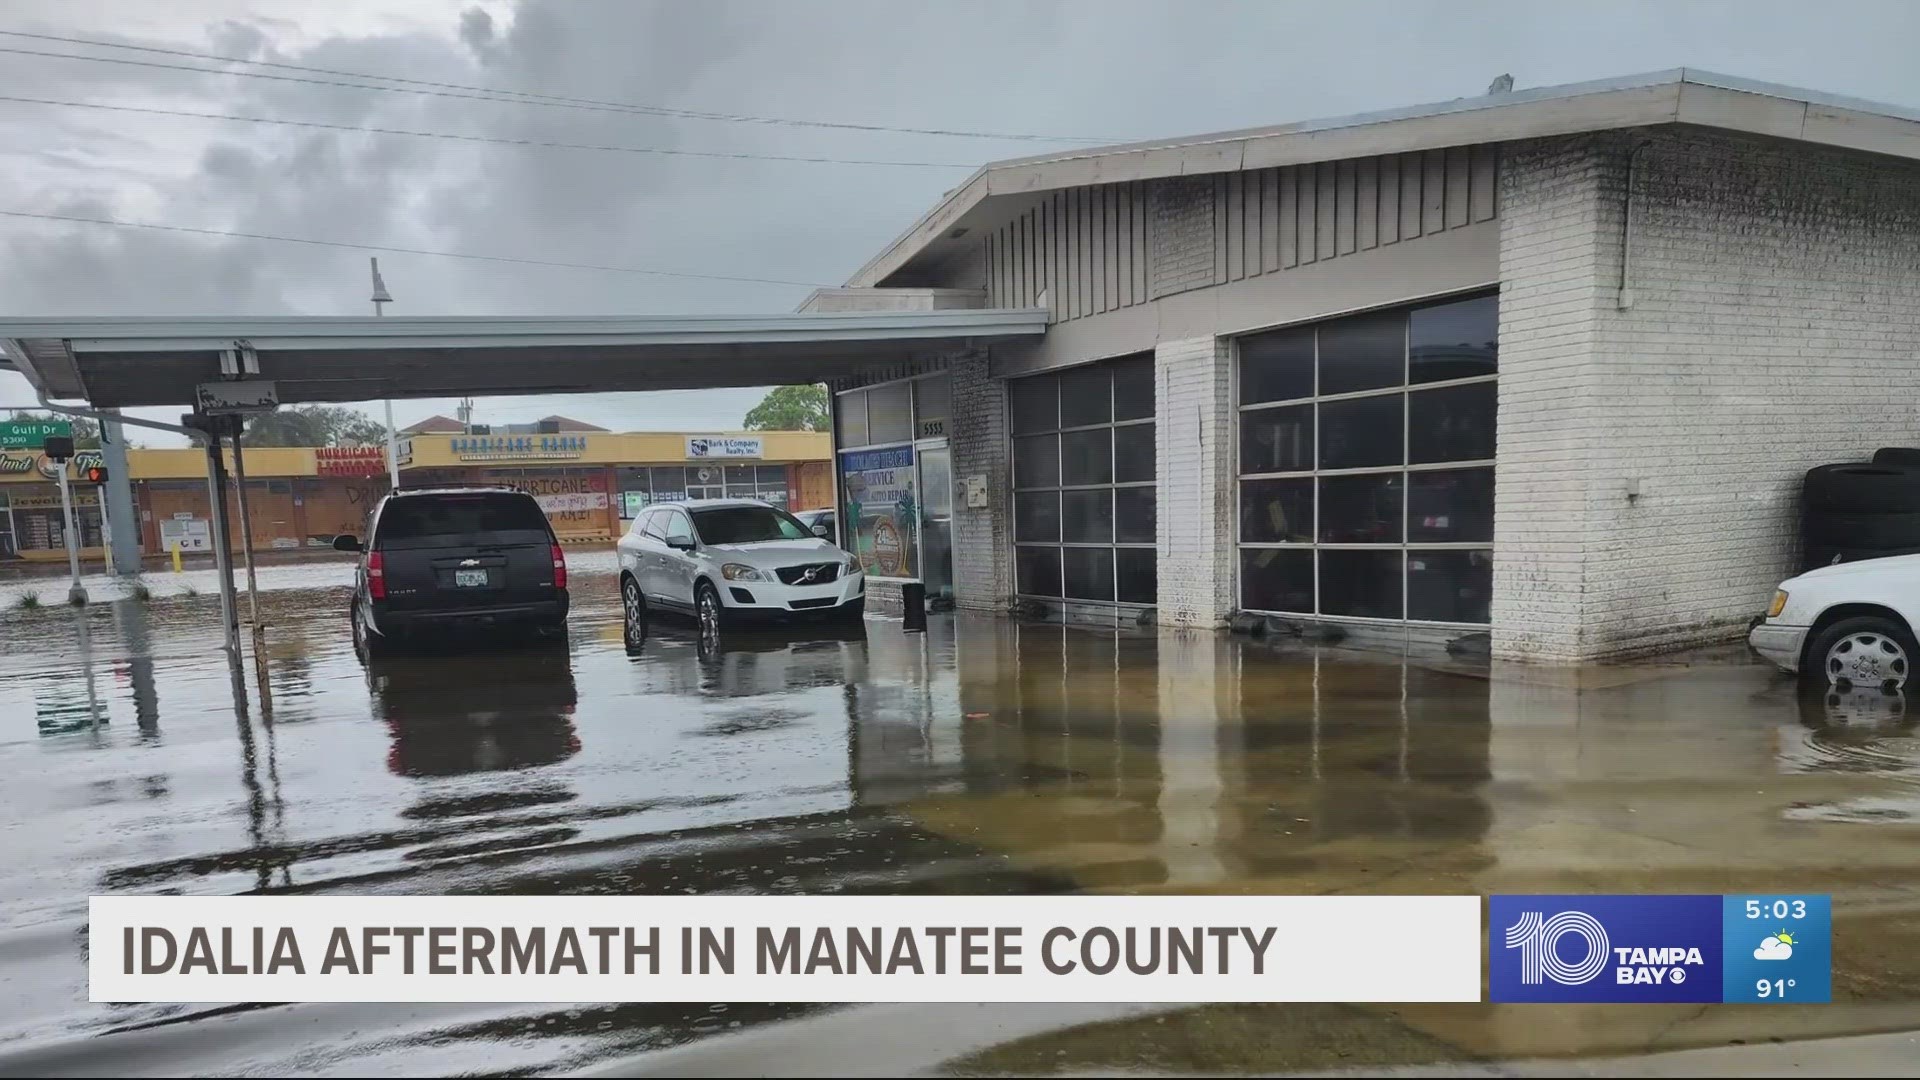 Manatee County will have trucks through the weekend sweeping debris and cleaning up to prevent further damage issues.